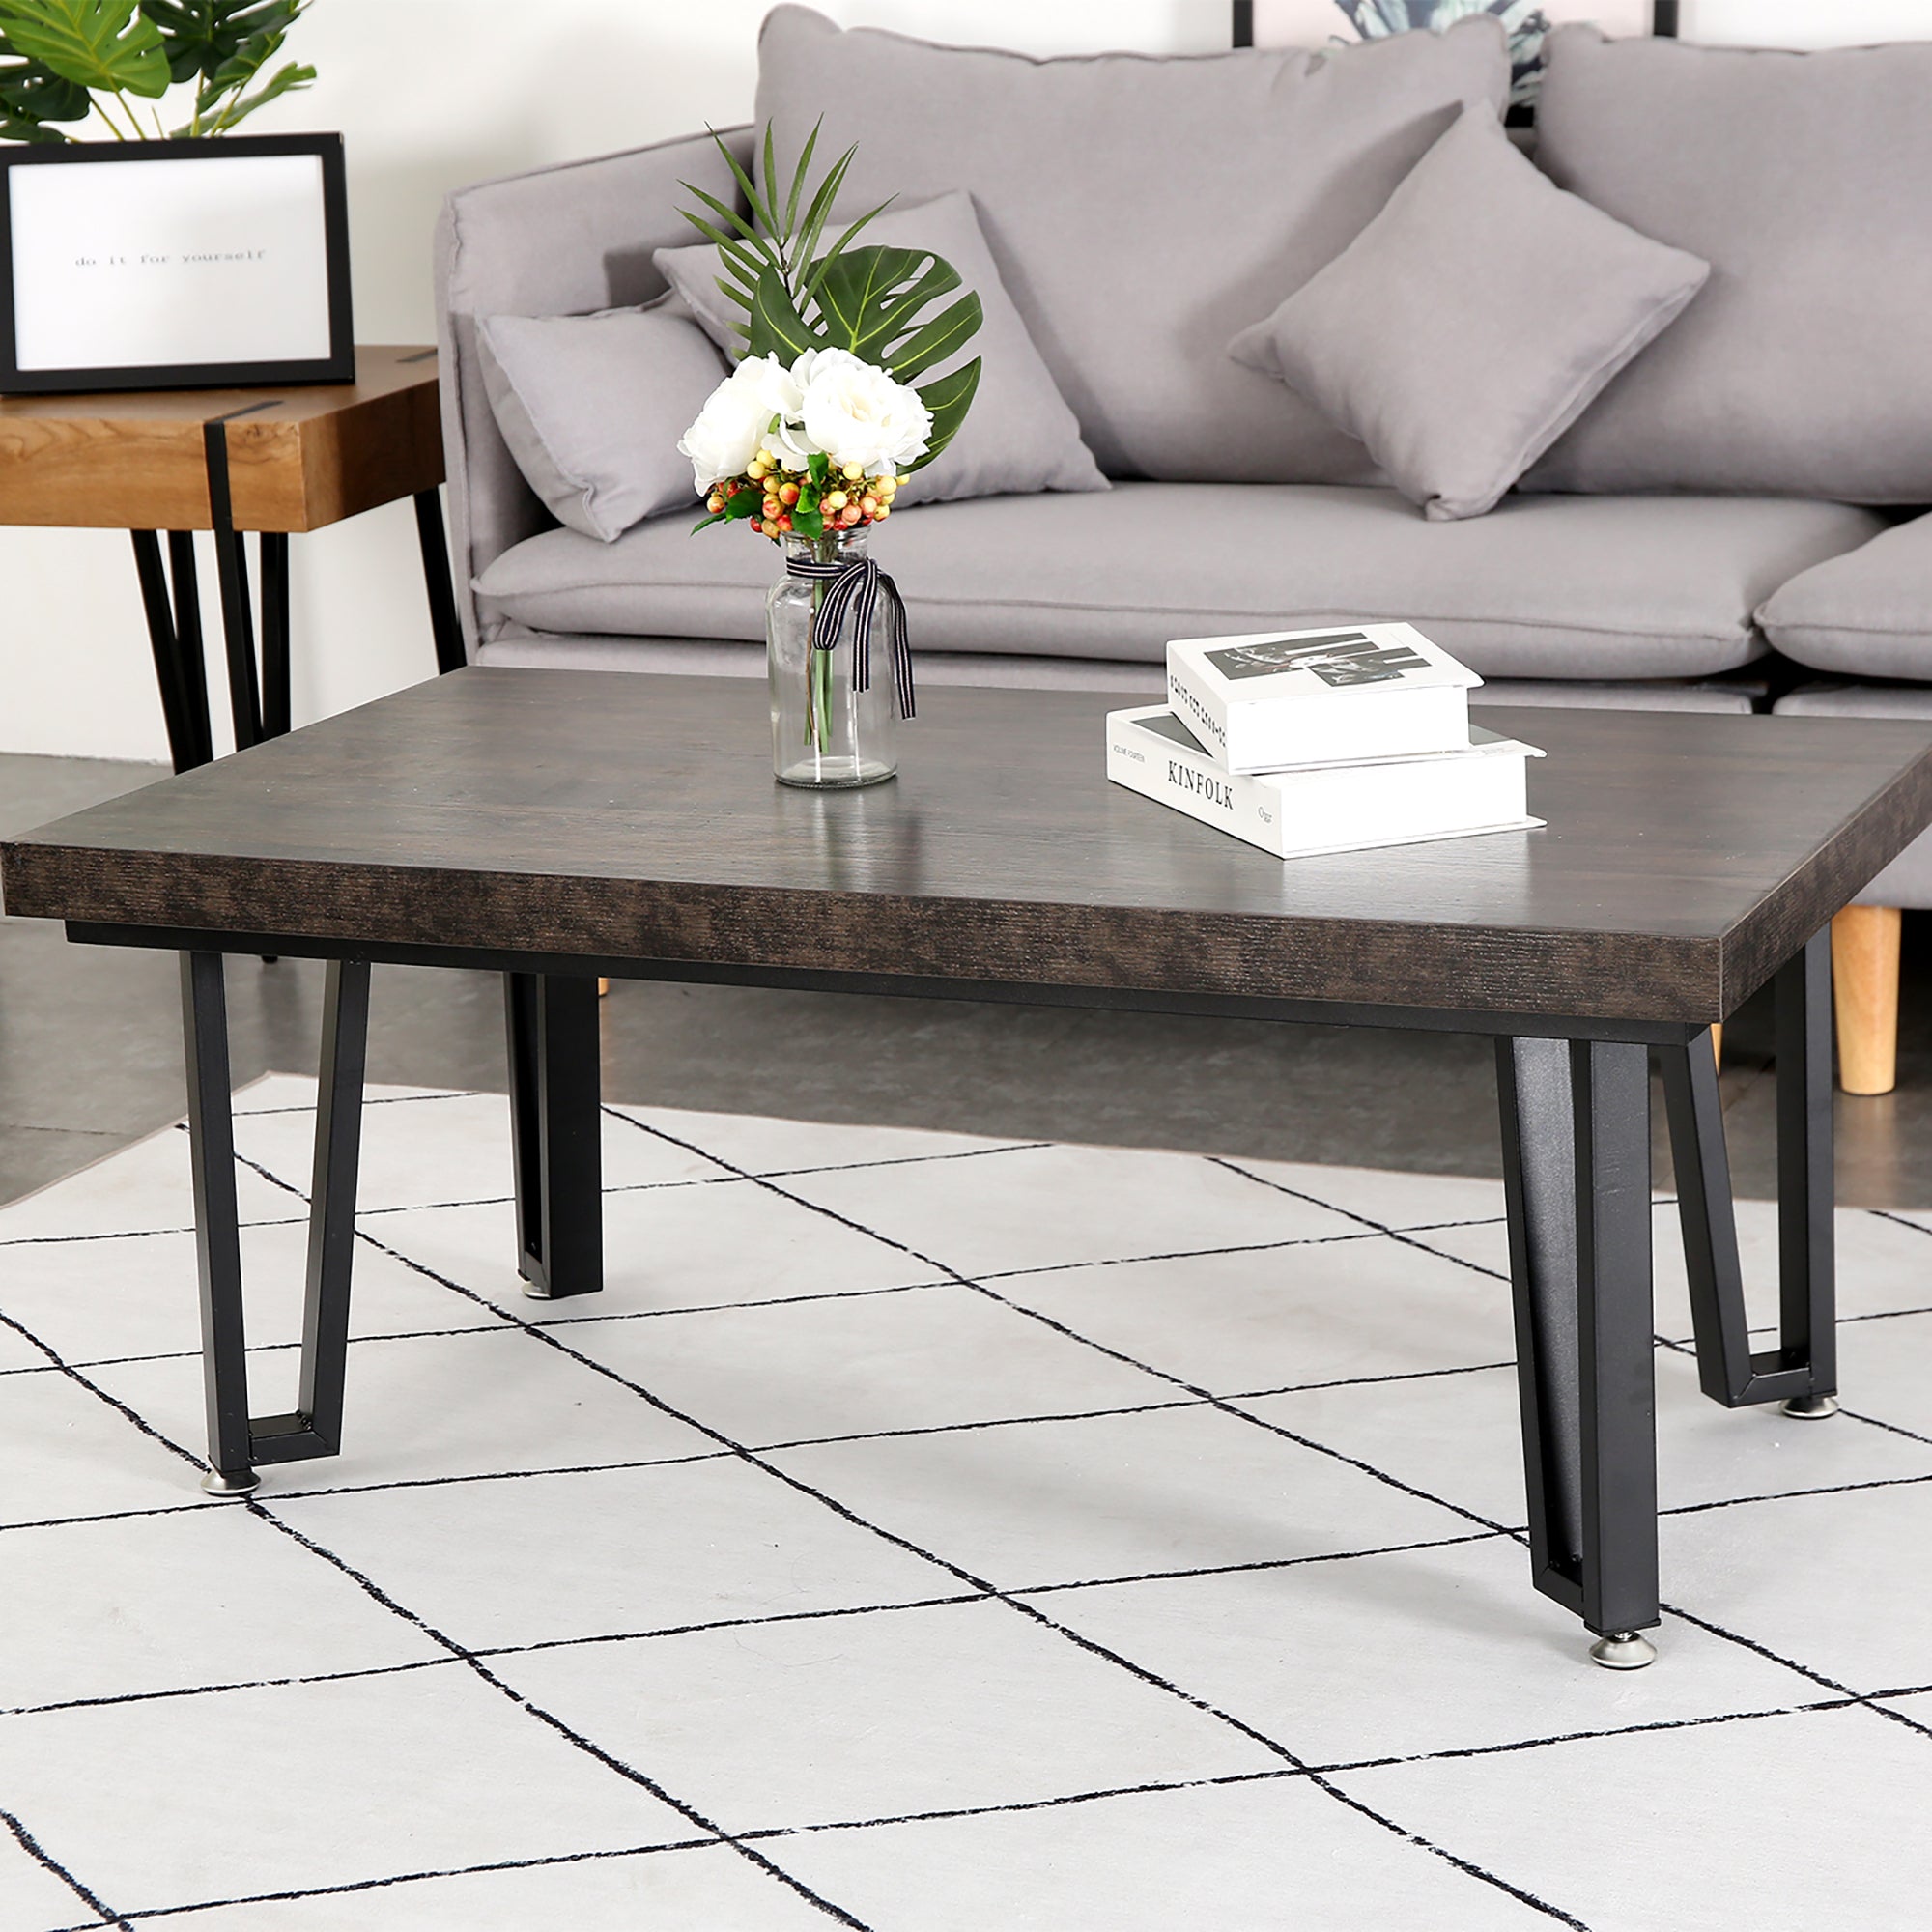 Ivinta Industrial Unique Rectangular Coffee Table for Living Room